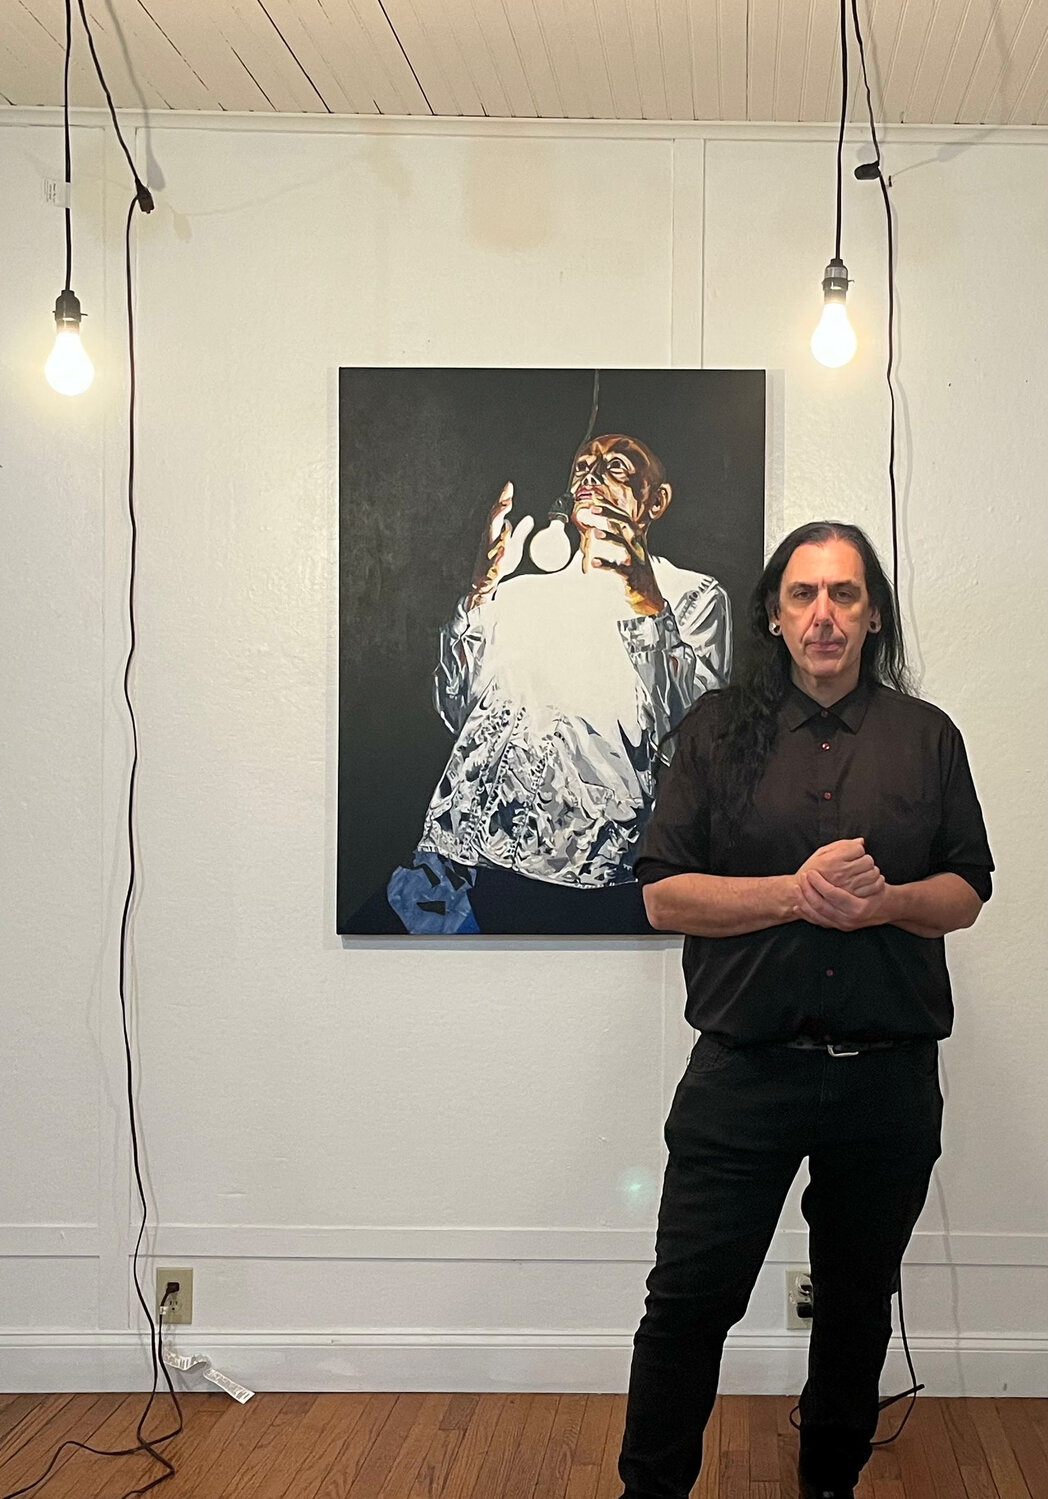 Artist Mark Propper hosted his solo art show, “Future Free,” exploring the hyper-alienation in a world of worn-out philosophies.